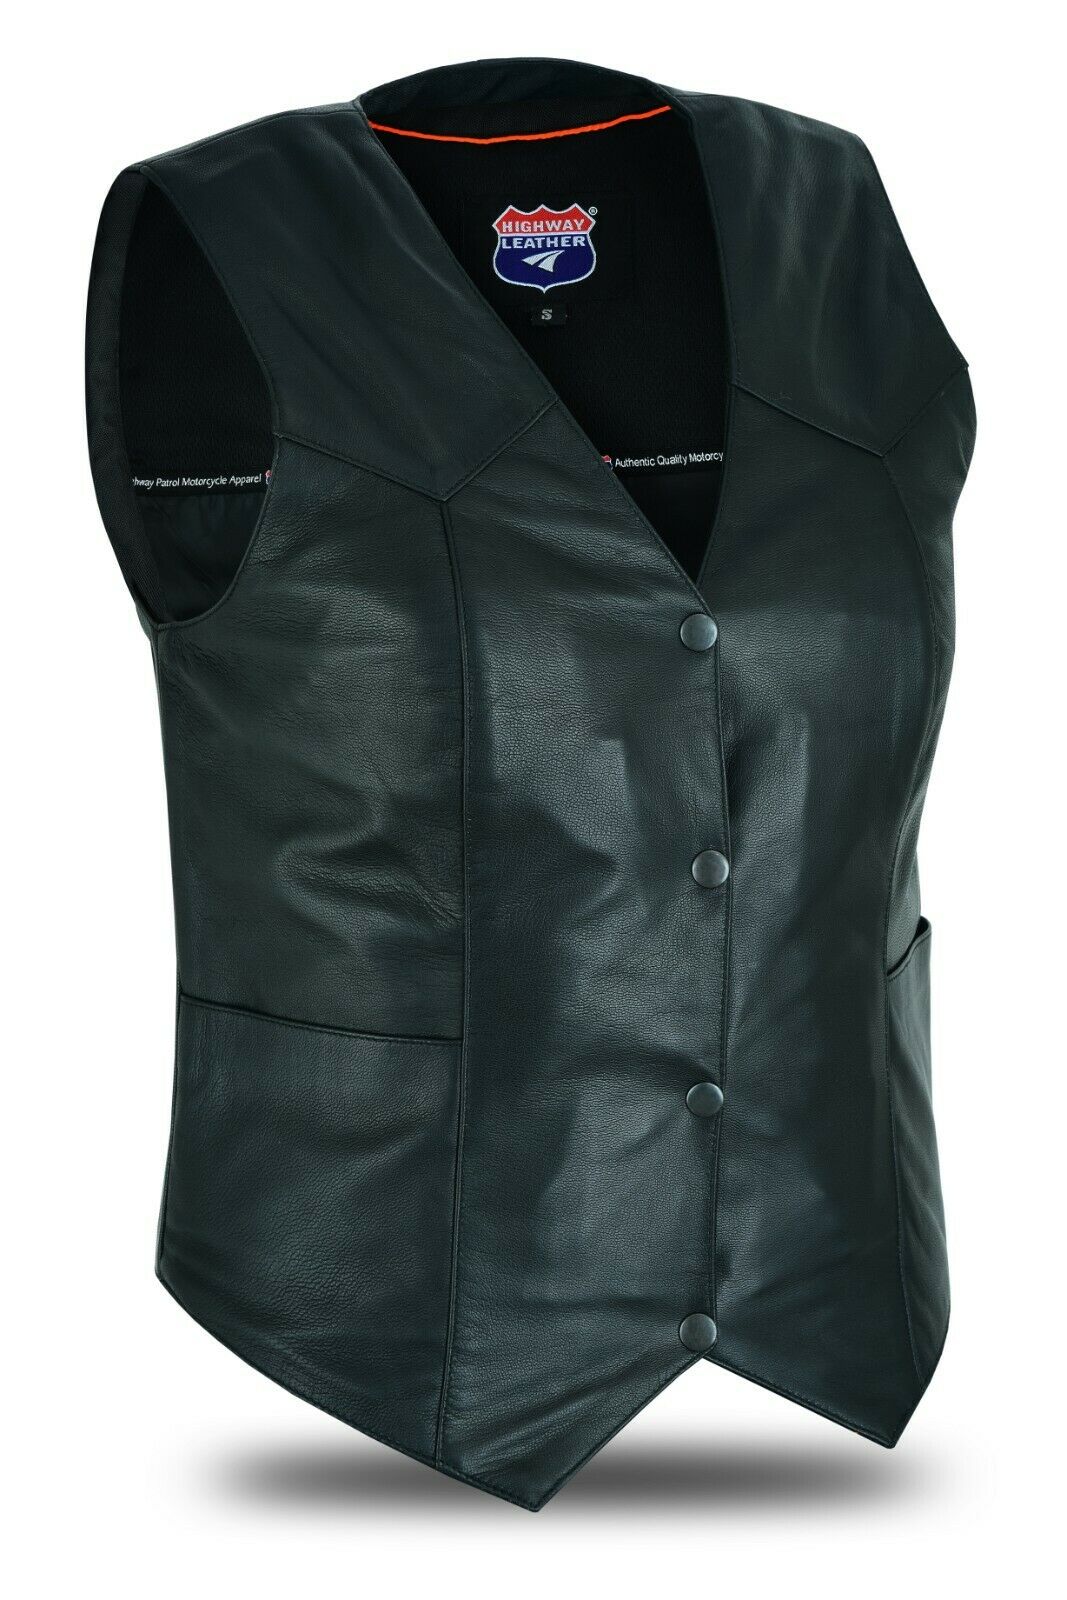 Ladies Womens solid soft leather biker motorcycle vest black concealed carry